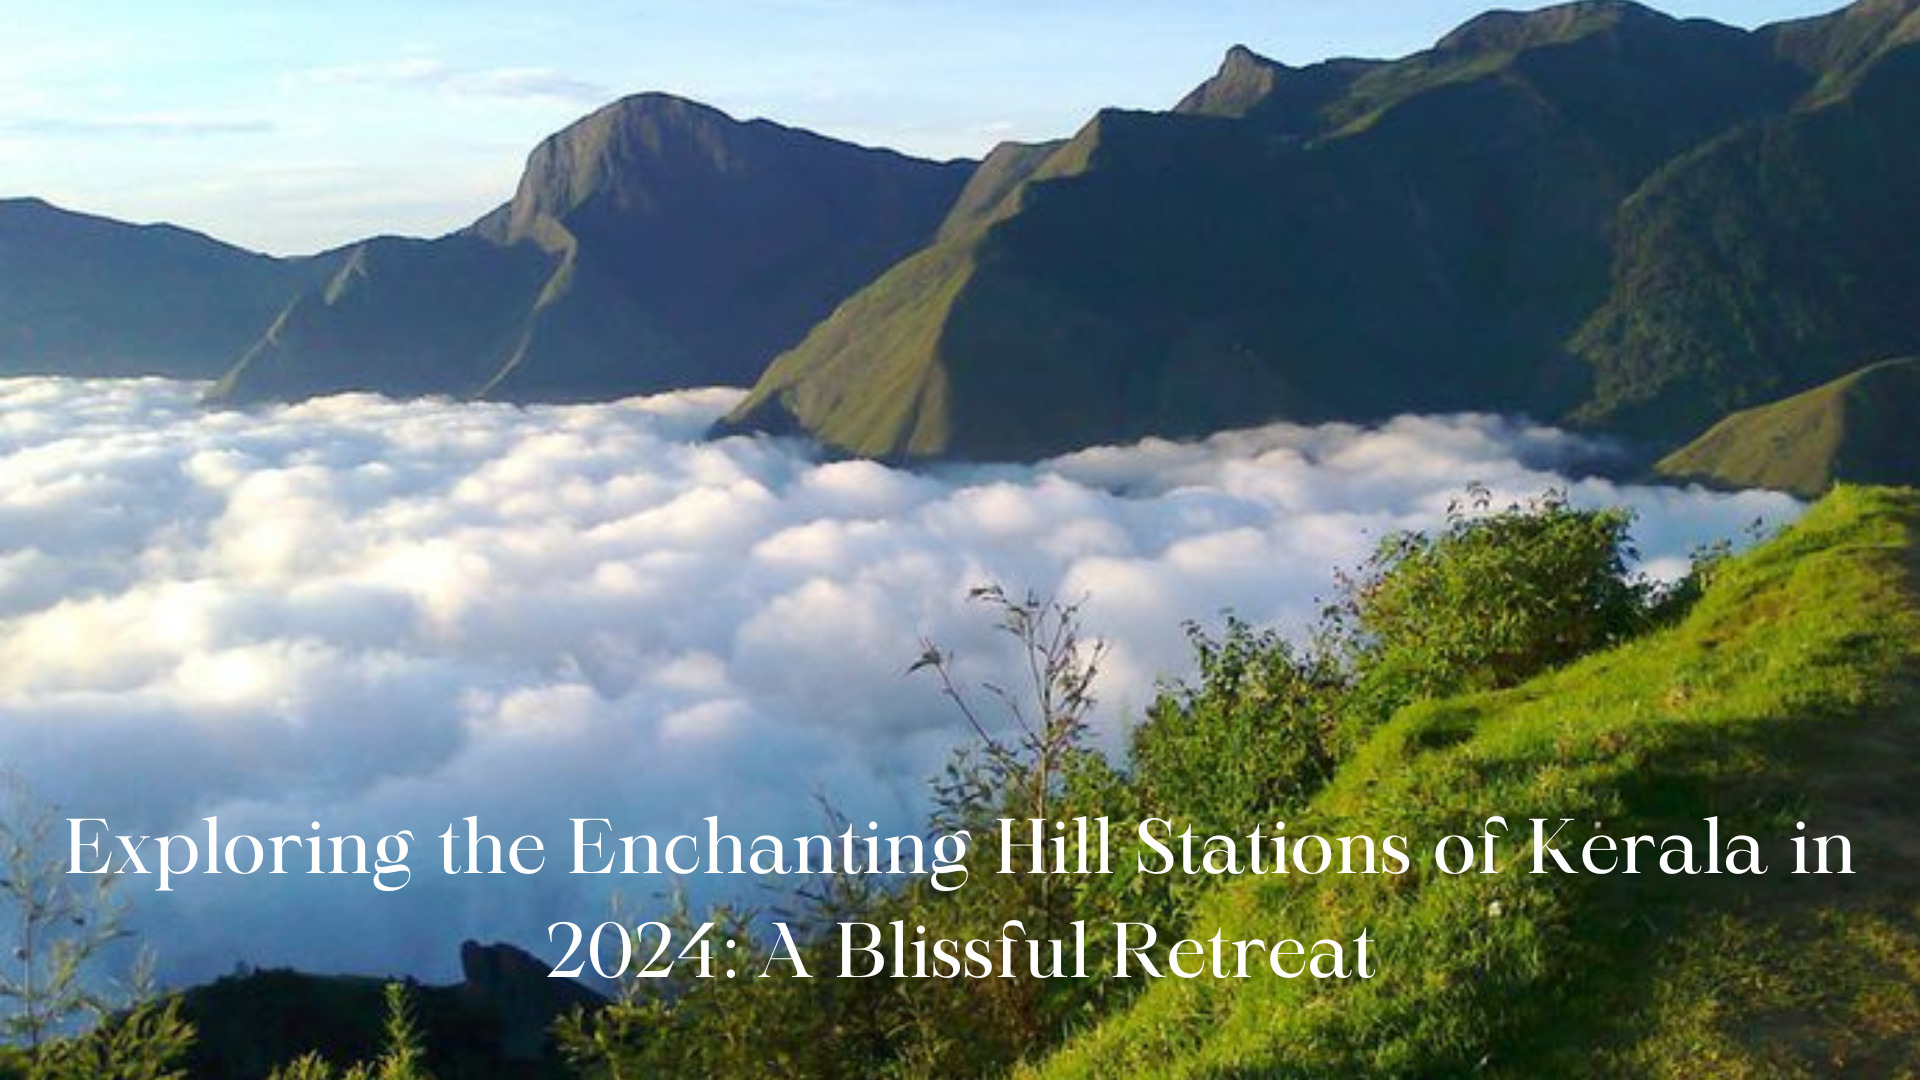 Exploring the Enchanting Hill Stations of Kerala in 2024: A Blissful Retreat